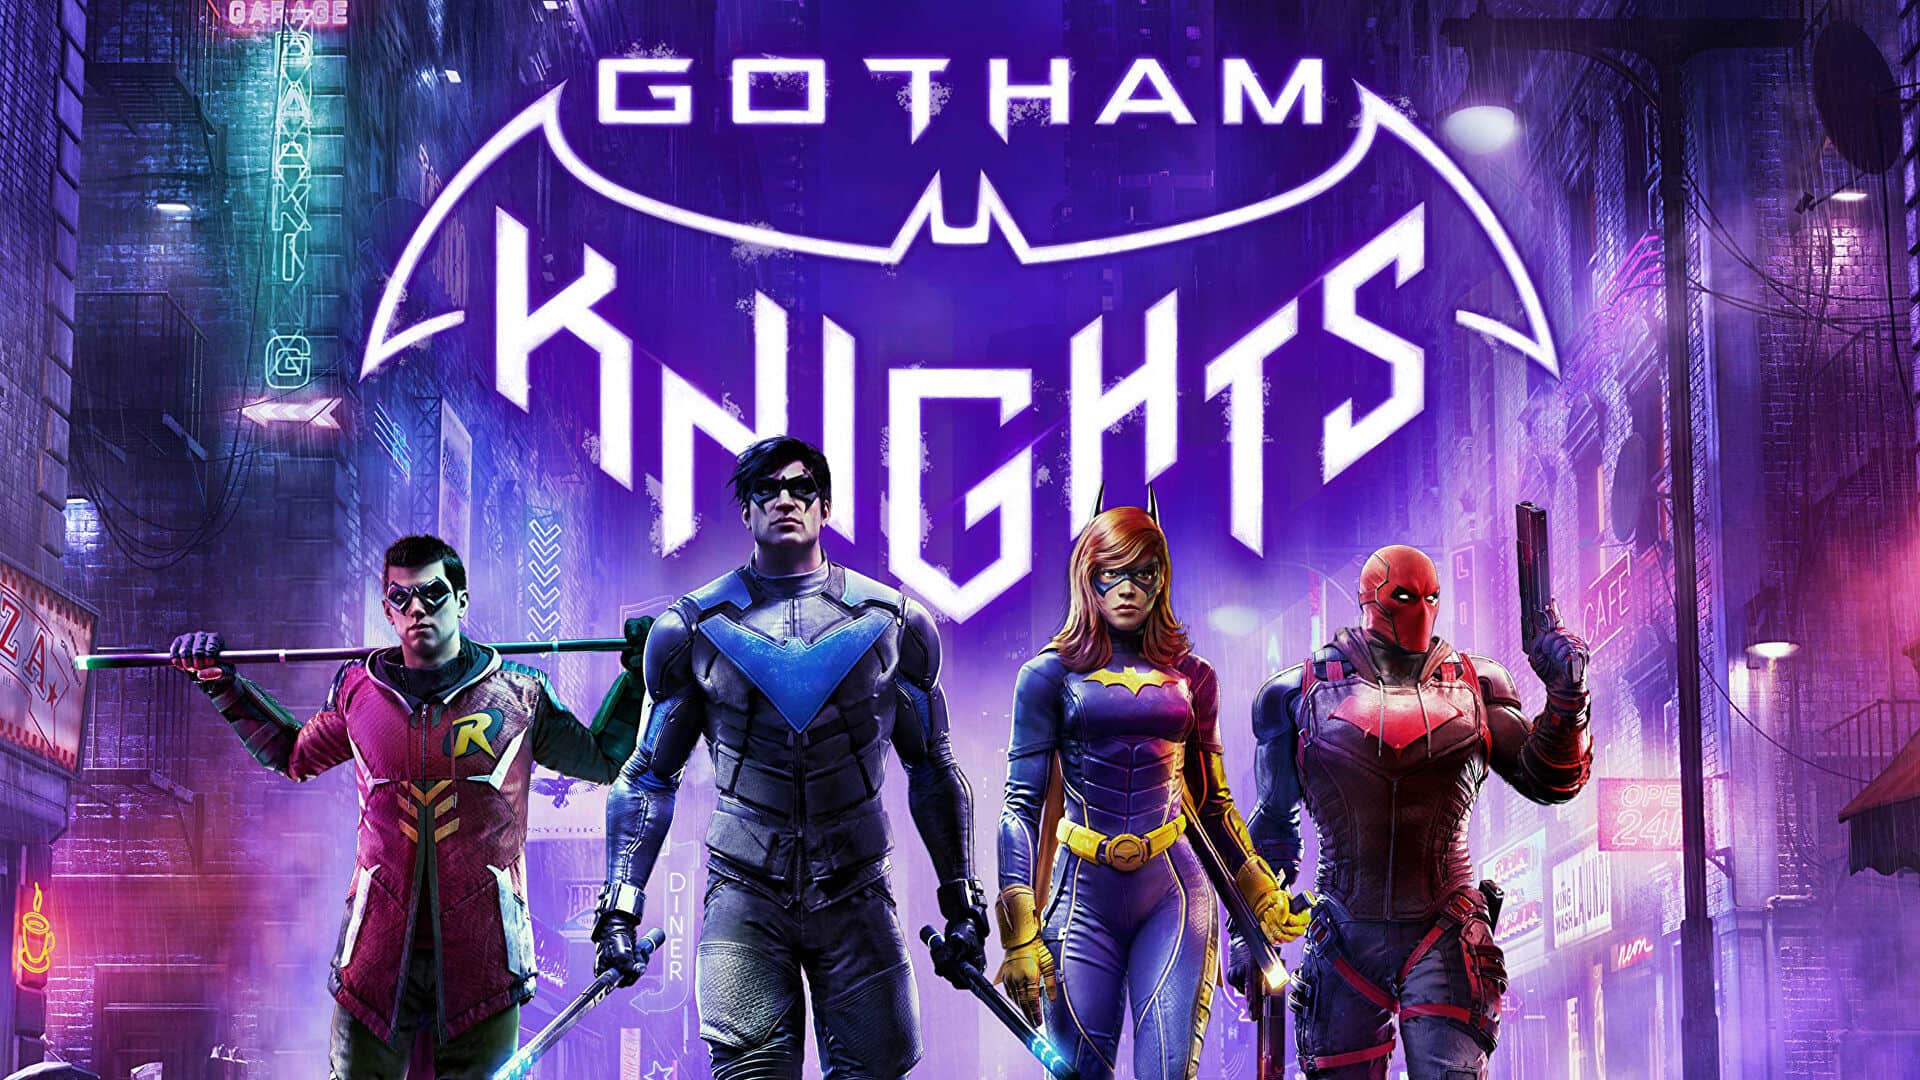 Gotham Knights (PS5) 4K HDR Gameplay - (PS5 Version) 